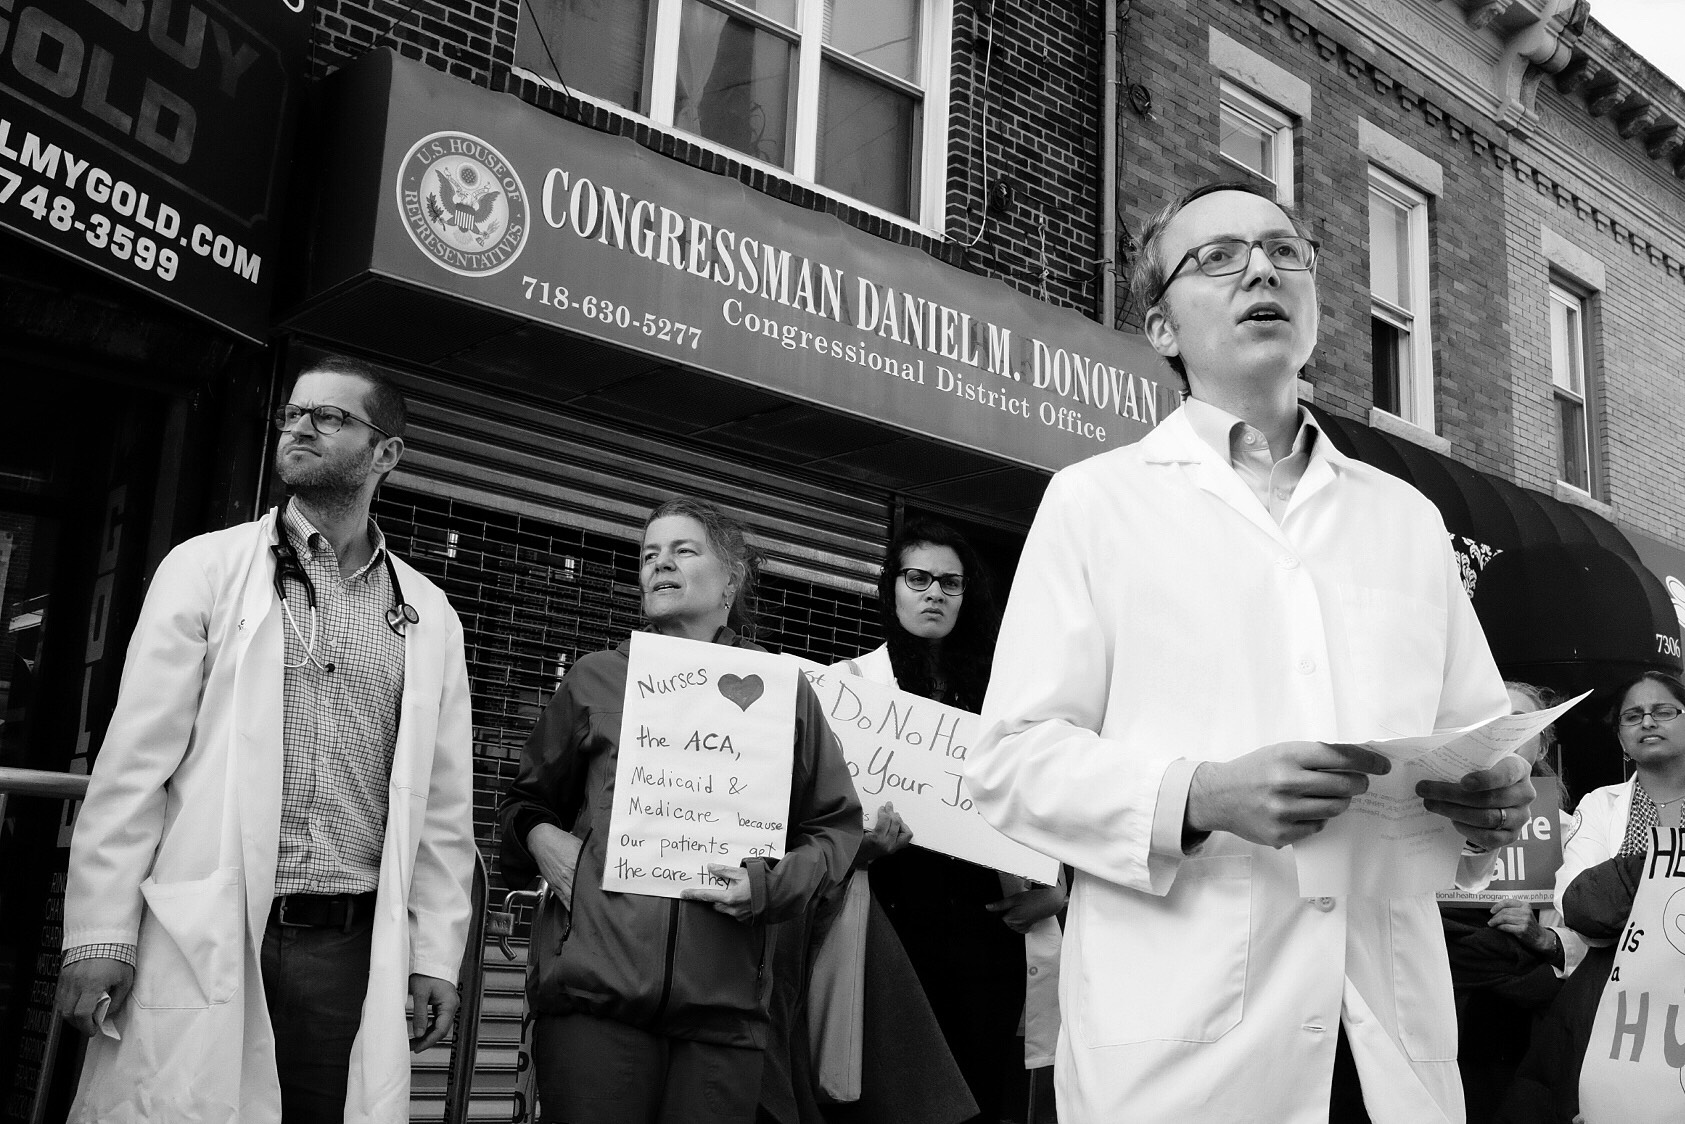 #HealthProfessionals Protest: Rep. Dan Donovan's Office (February 25th, 2017)